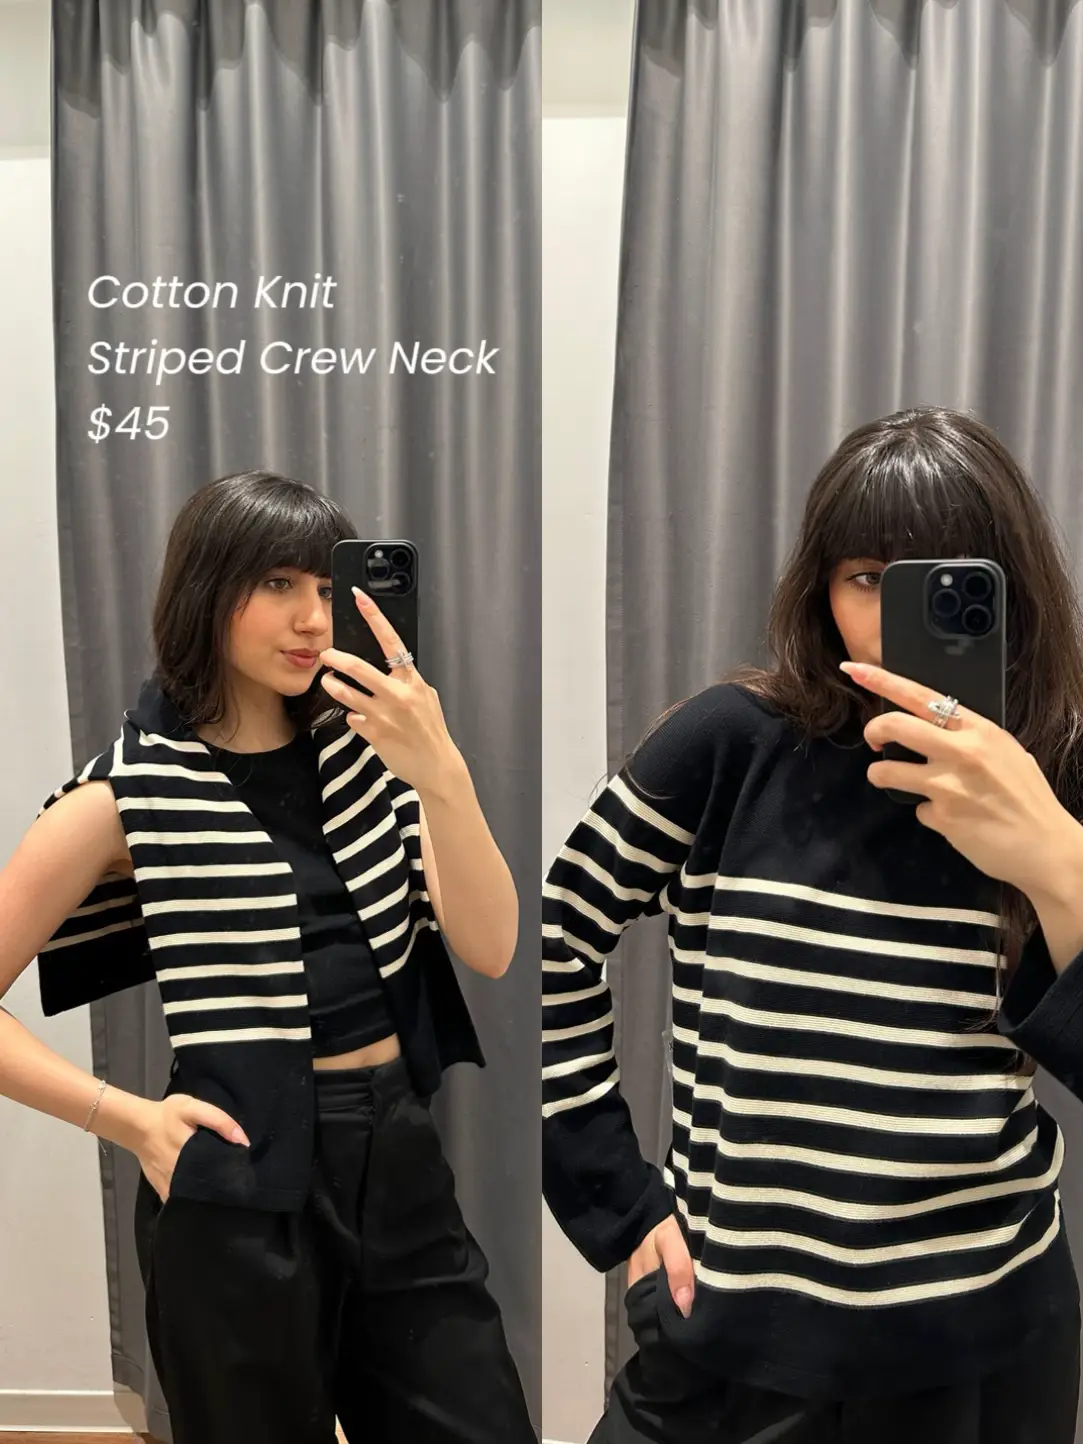 Uniqlo Try-On: Parisian Aesthetic 🥐, Gallery posted by yasminmoradi